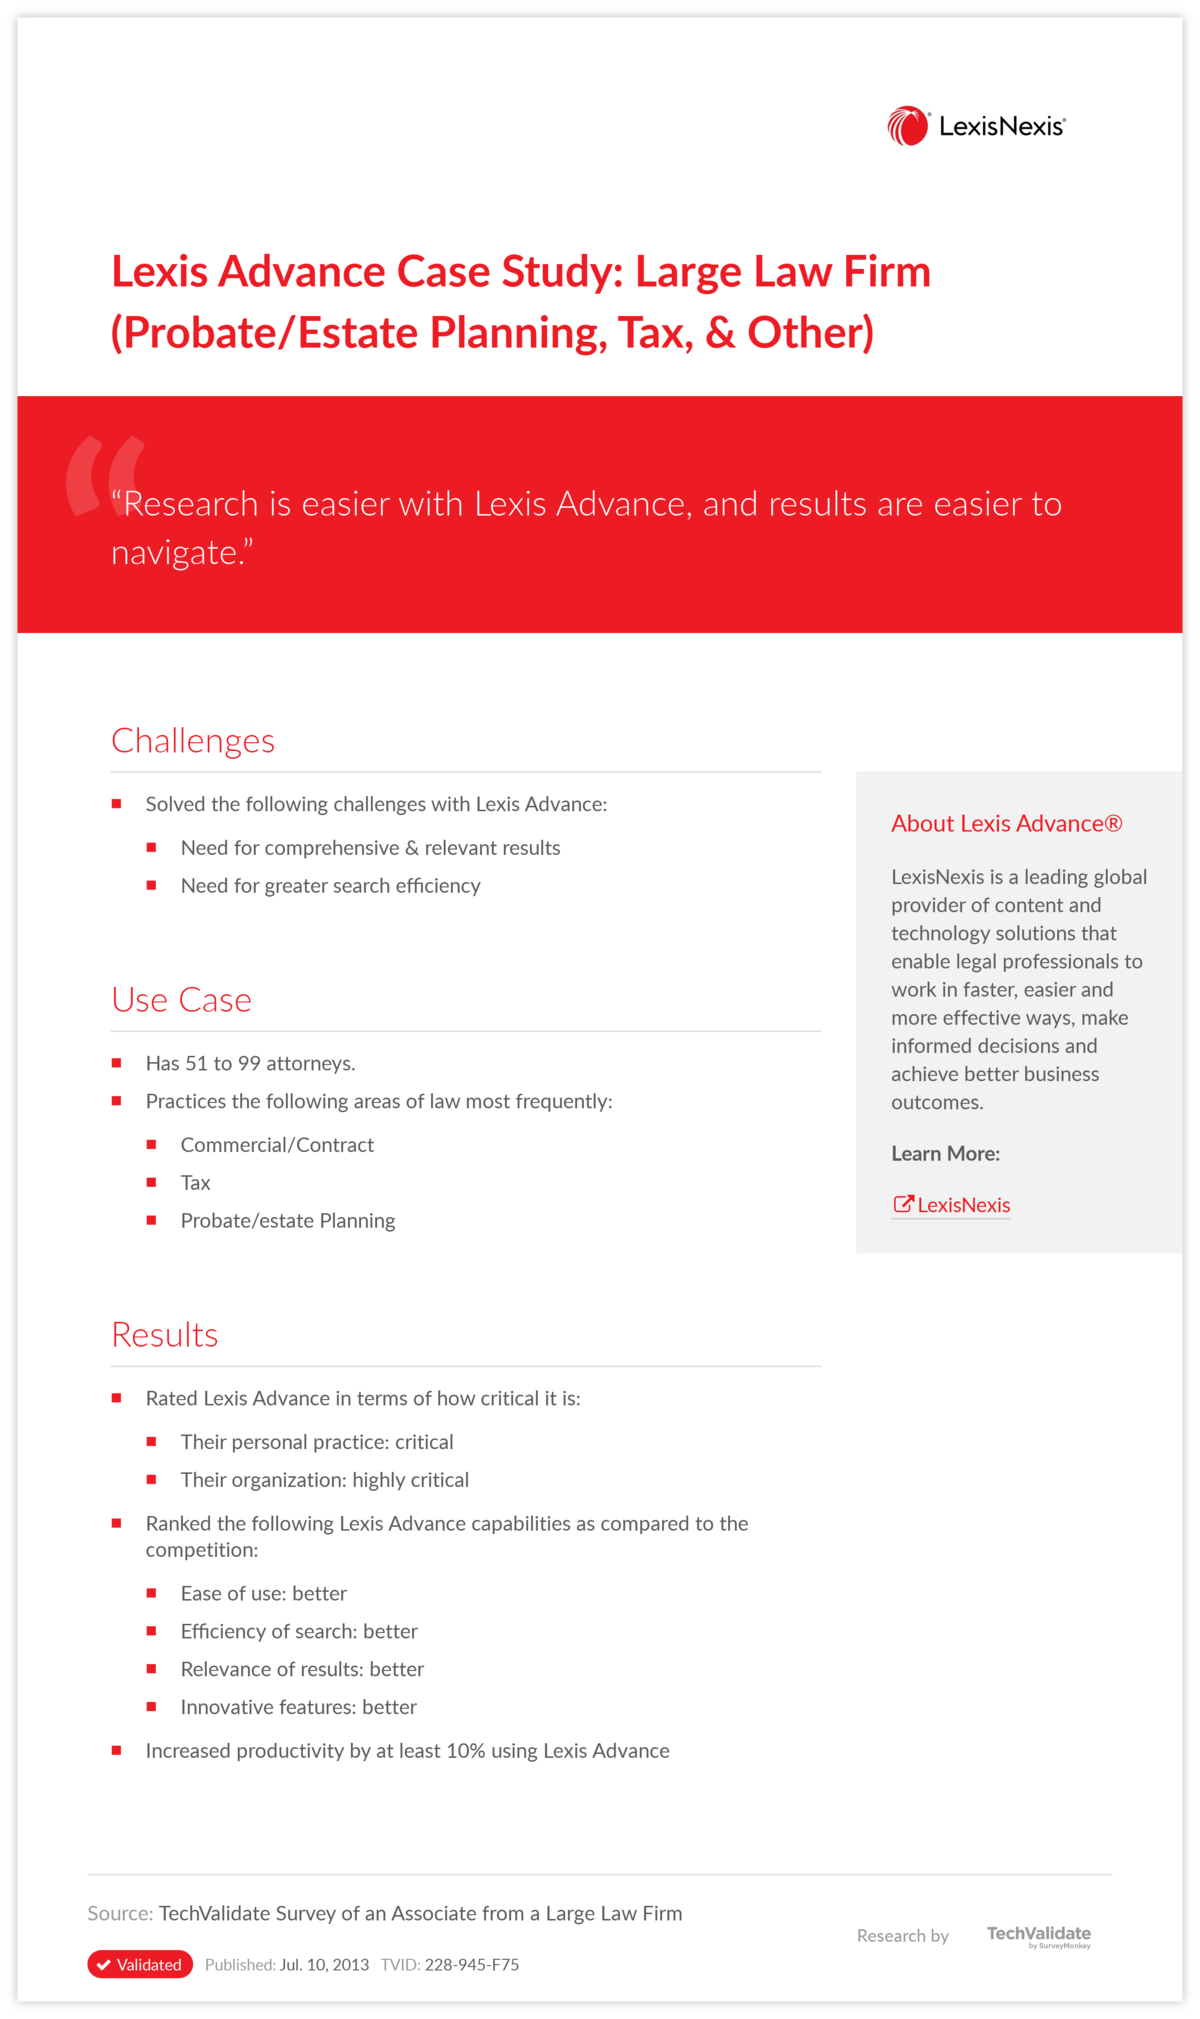 Lexis Advance Case Study: Large Law Firm (Probate/Estate Planning, Tax, & Other)